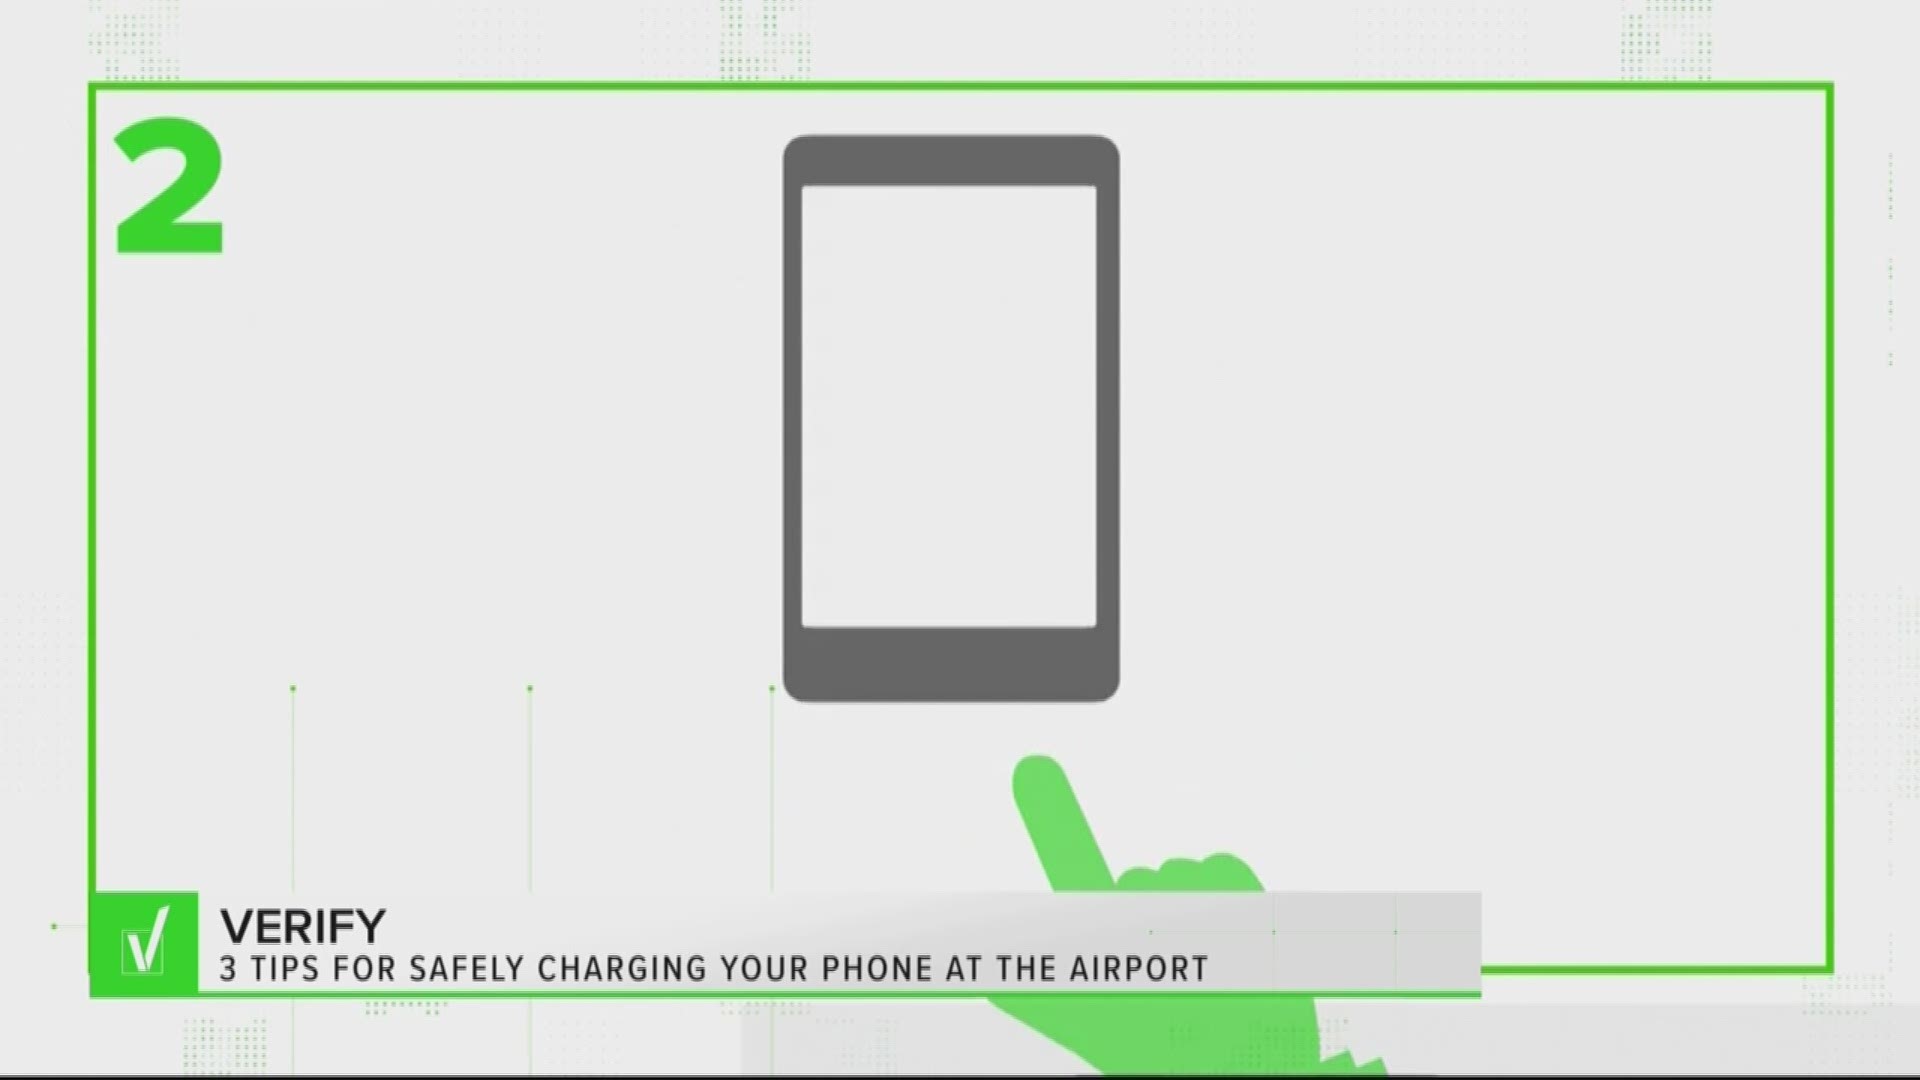 Cybersecurity fraudsters can use USB charging stations at airports to infect your phone with malware and steal information. Here are three tips to protect yourself